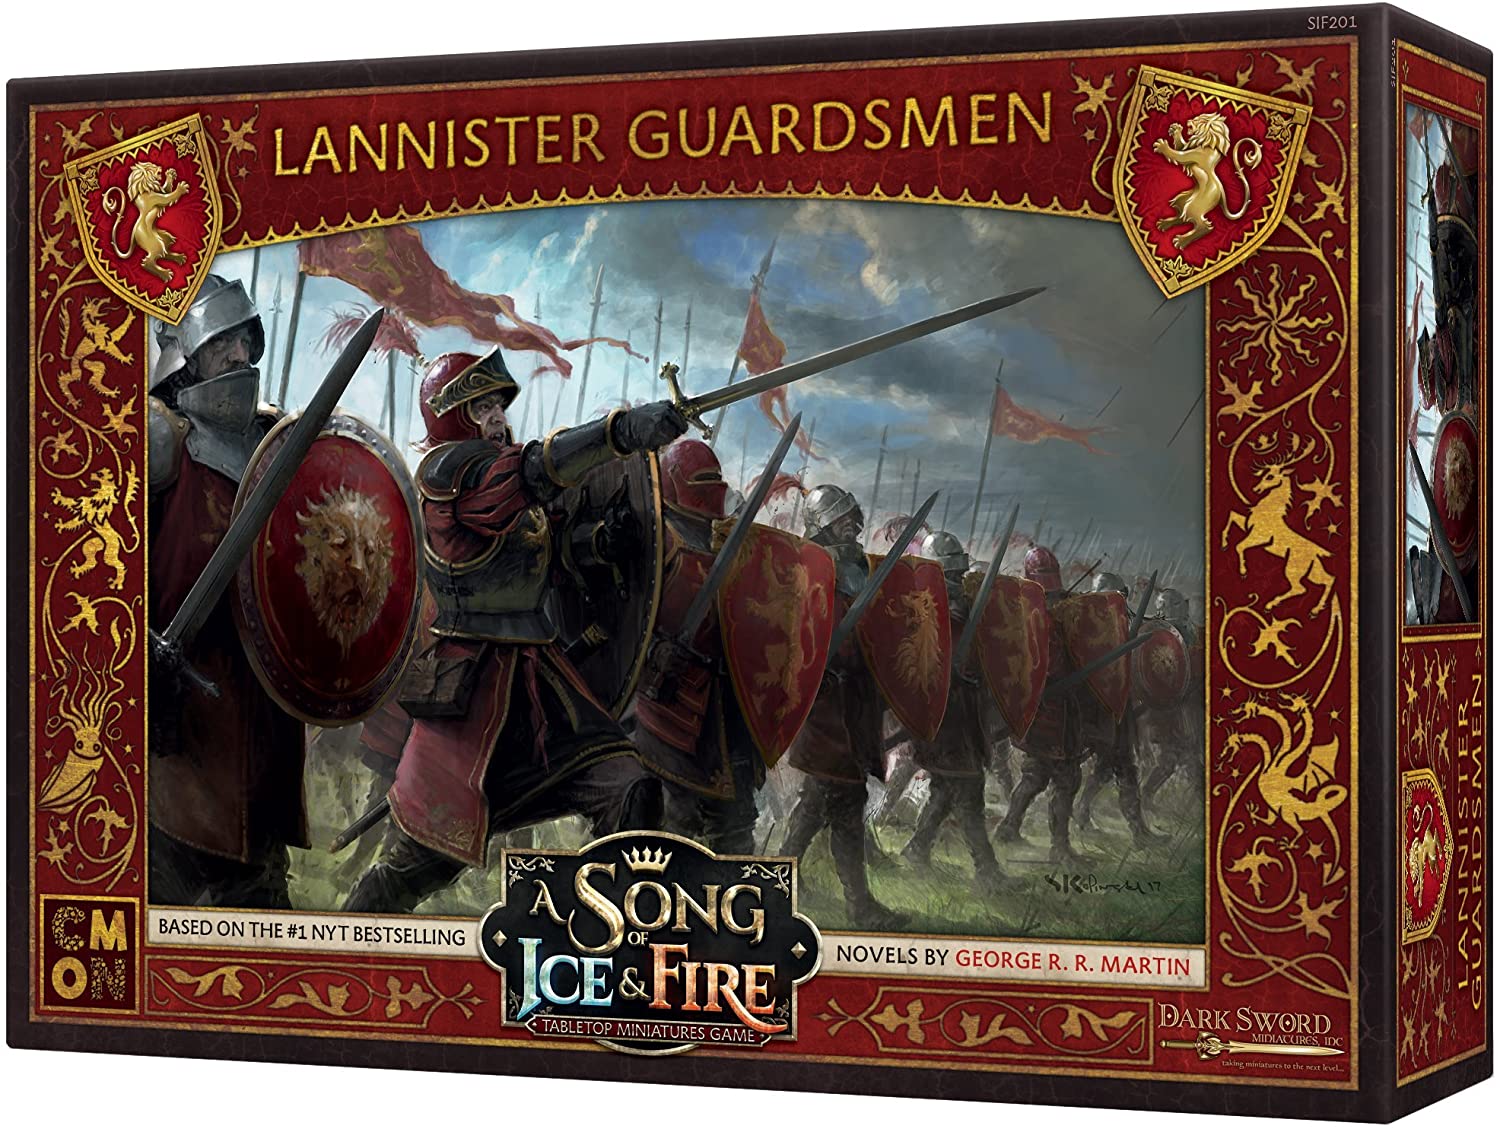 A Song of Ice & Fire: Tabletop Miniatures Game Lannister Guardsmen Unit Box, by CMON - image 1 of 7